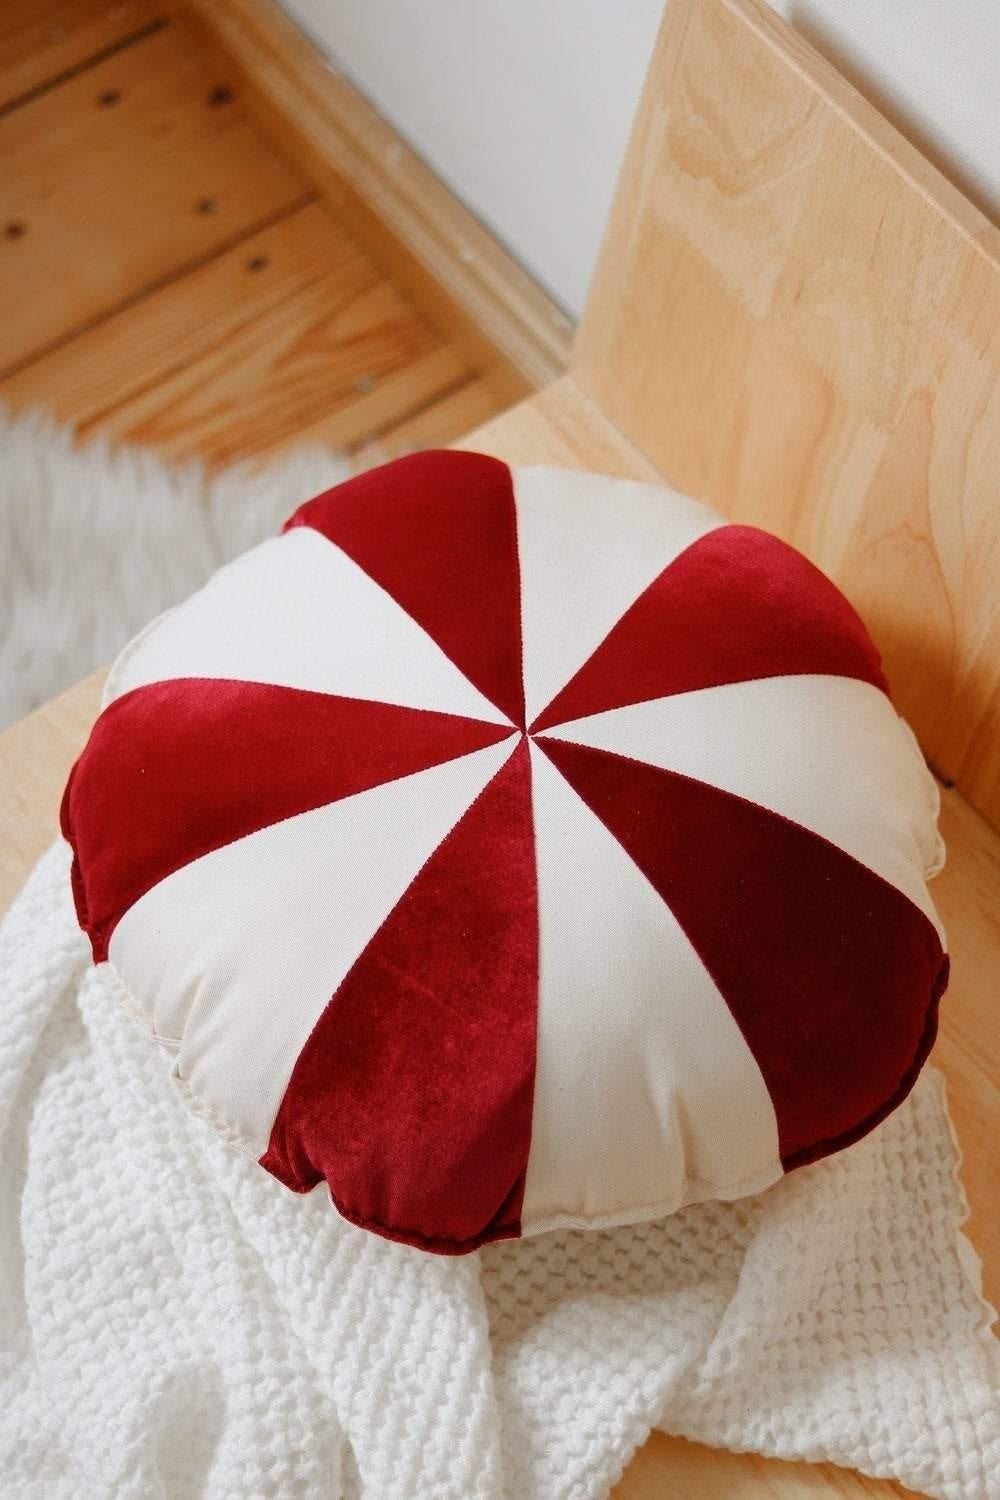 Round Patchwork Pillow “Red Circus” | Kids Room & Nursery Decor